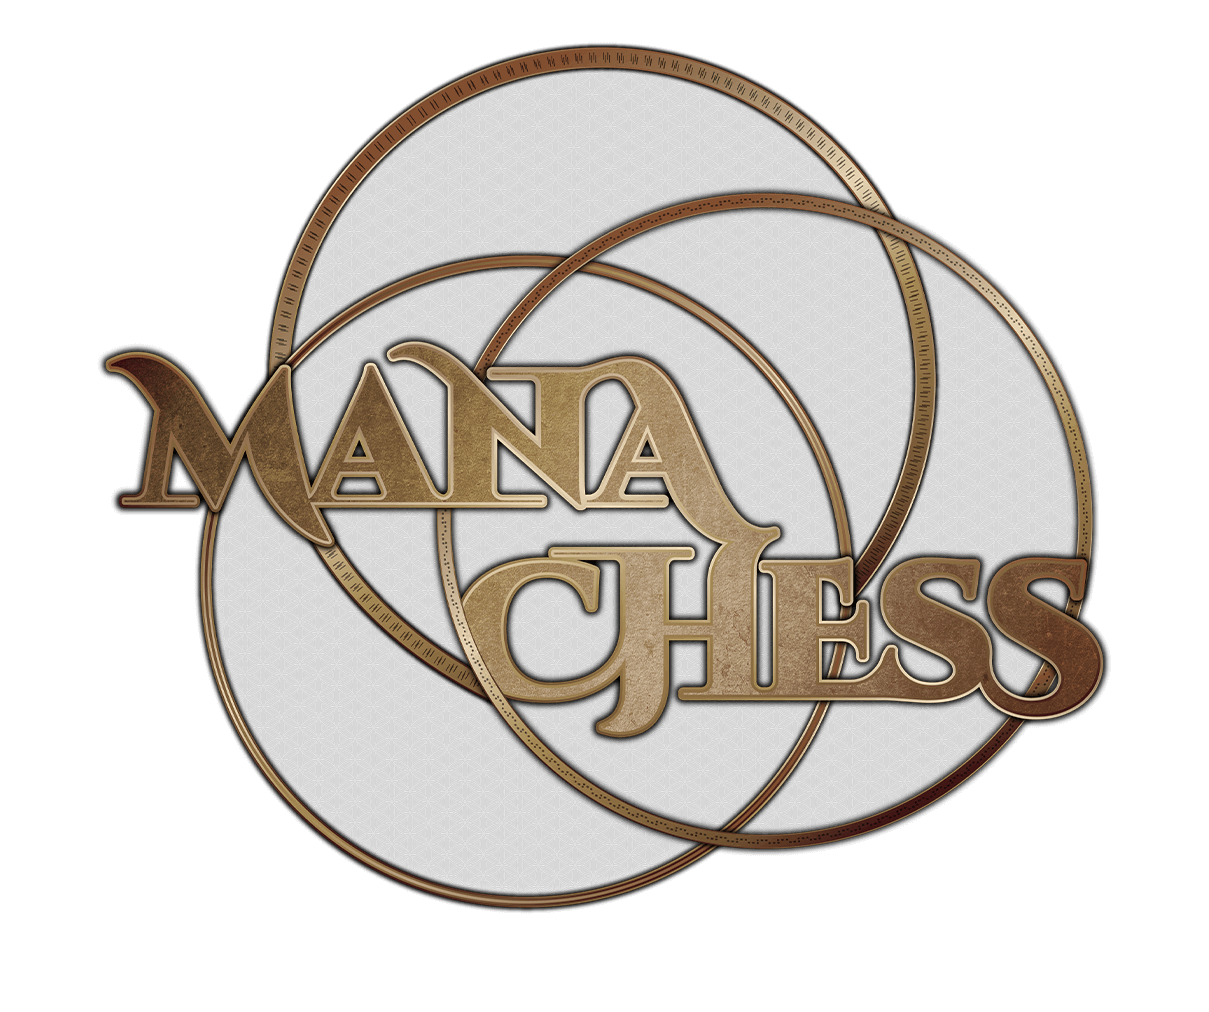 Flat version of Mana Chess logo with textured gold text and 3 gold rings behind it